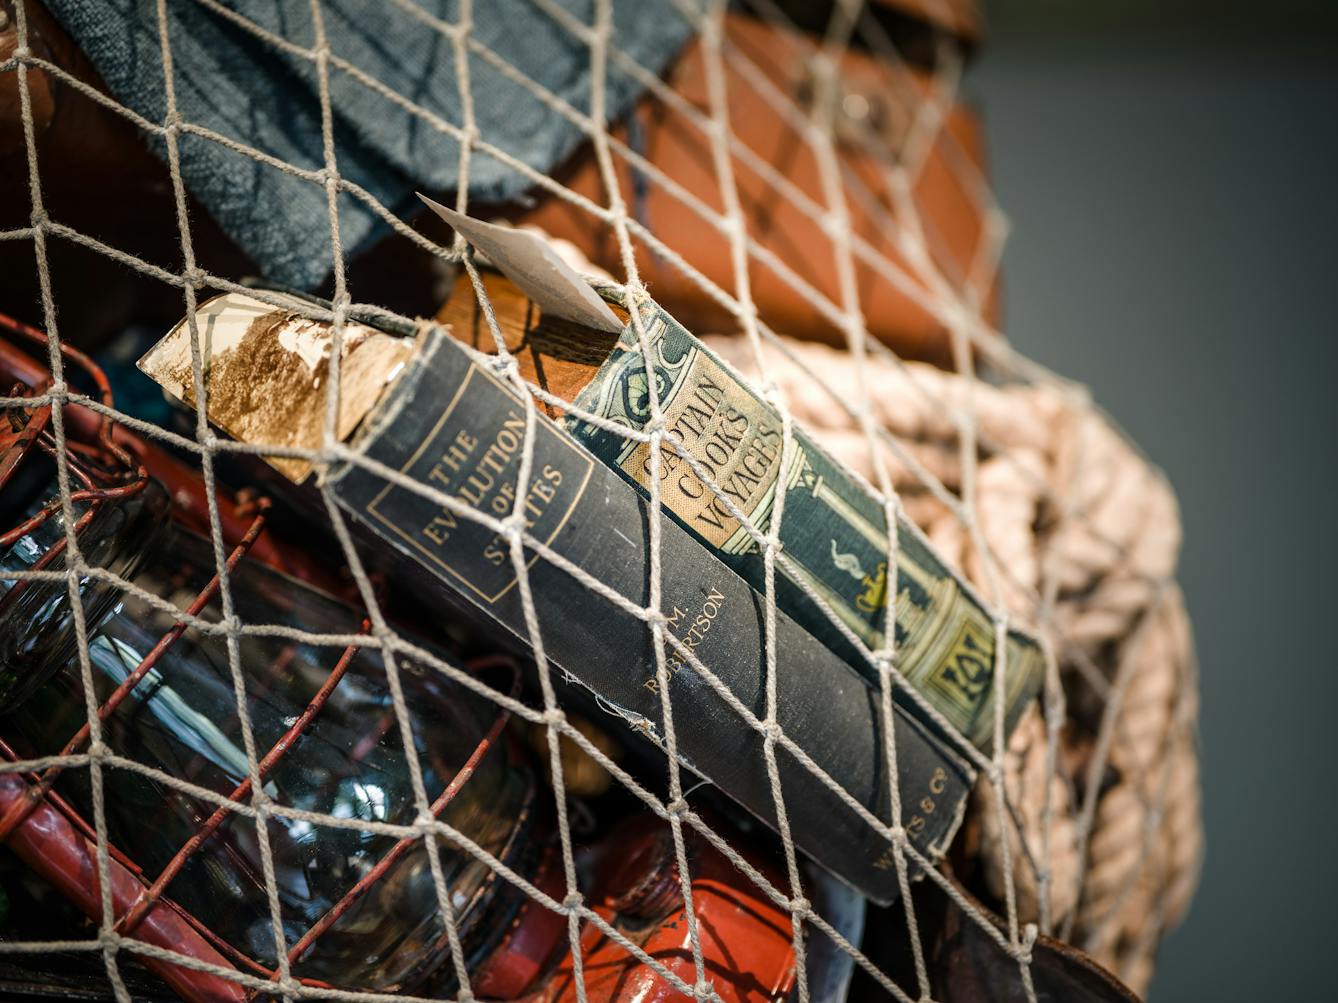 Photograph of a close-up detail of the net being carried by a life-size artwork of a figure resembling an astronaut. Within the net is a couple of books, one titled Captain Cook's Voyages, the other The Evolution of States.